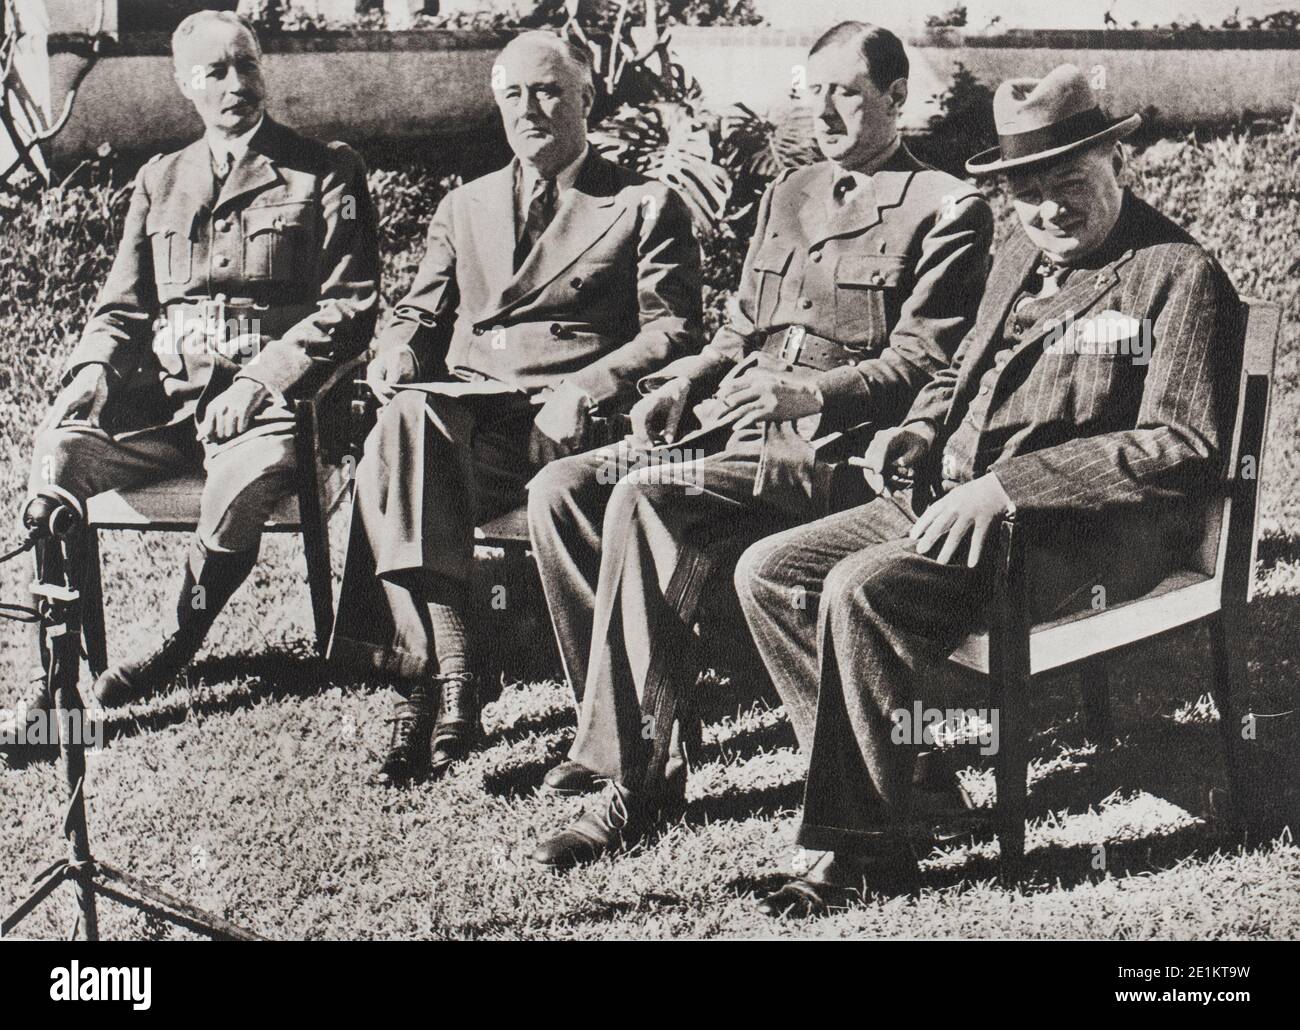 The Casablanca conference (14 January 1943, Morocco). Meeting to examine the situation and draw up the plan for future operations, President Roosevelt Stock Photo